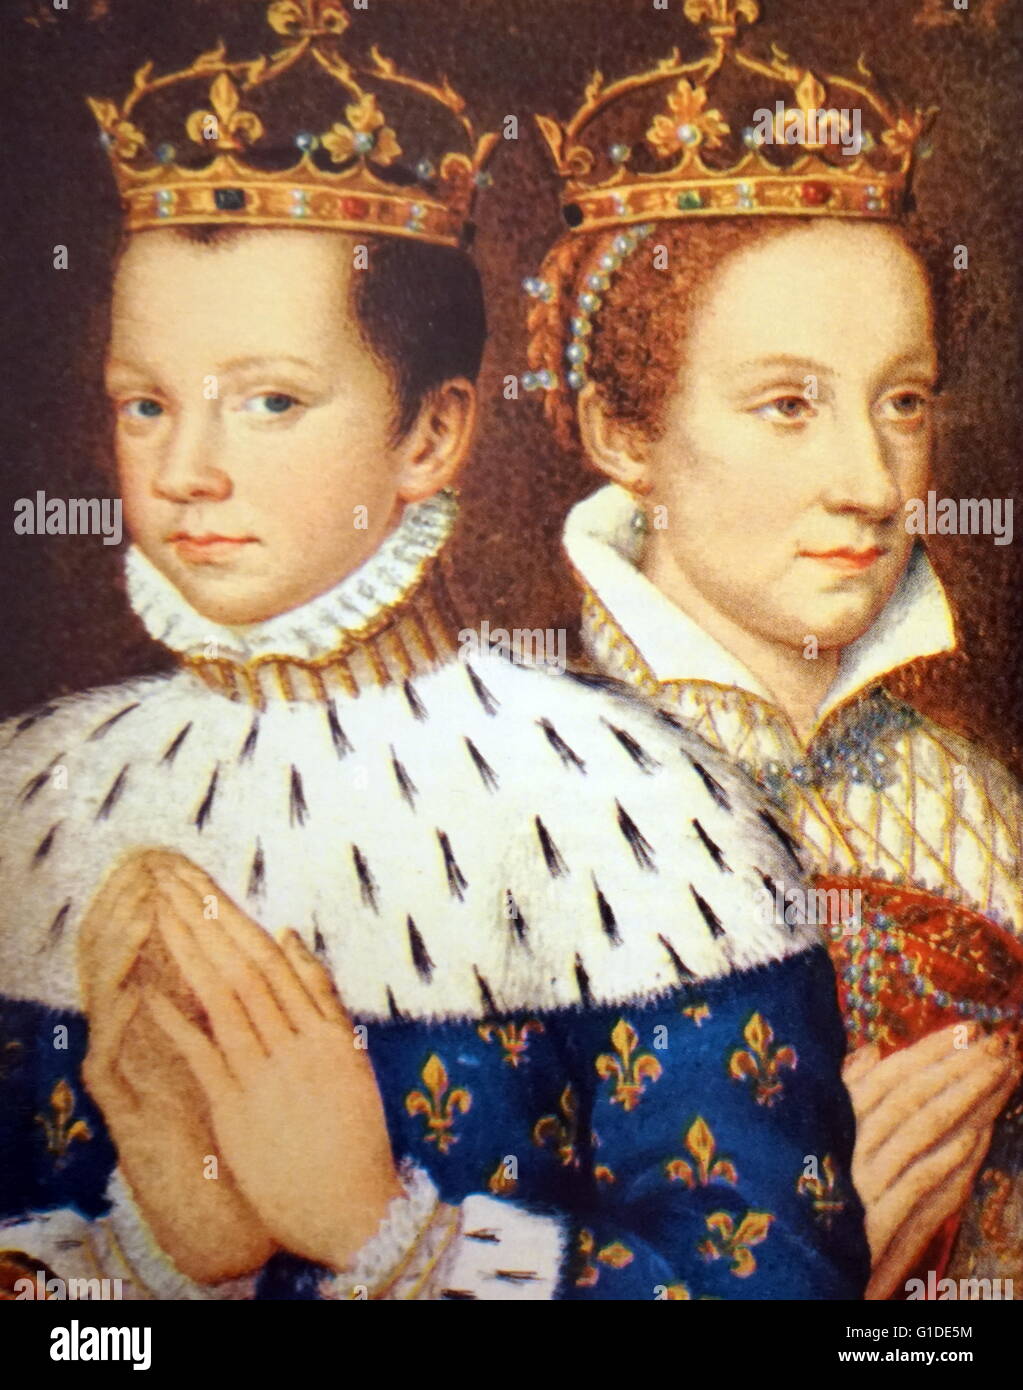 Portrait of Mary Stuart, Queen of Scots (1542-1587), with her first husband, Francis II, King of France (1544-1560). Dated 16th Century Stock Photo